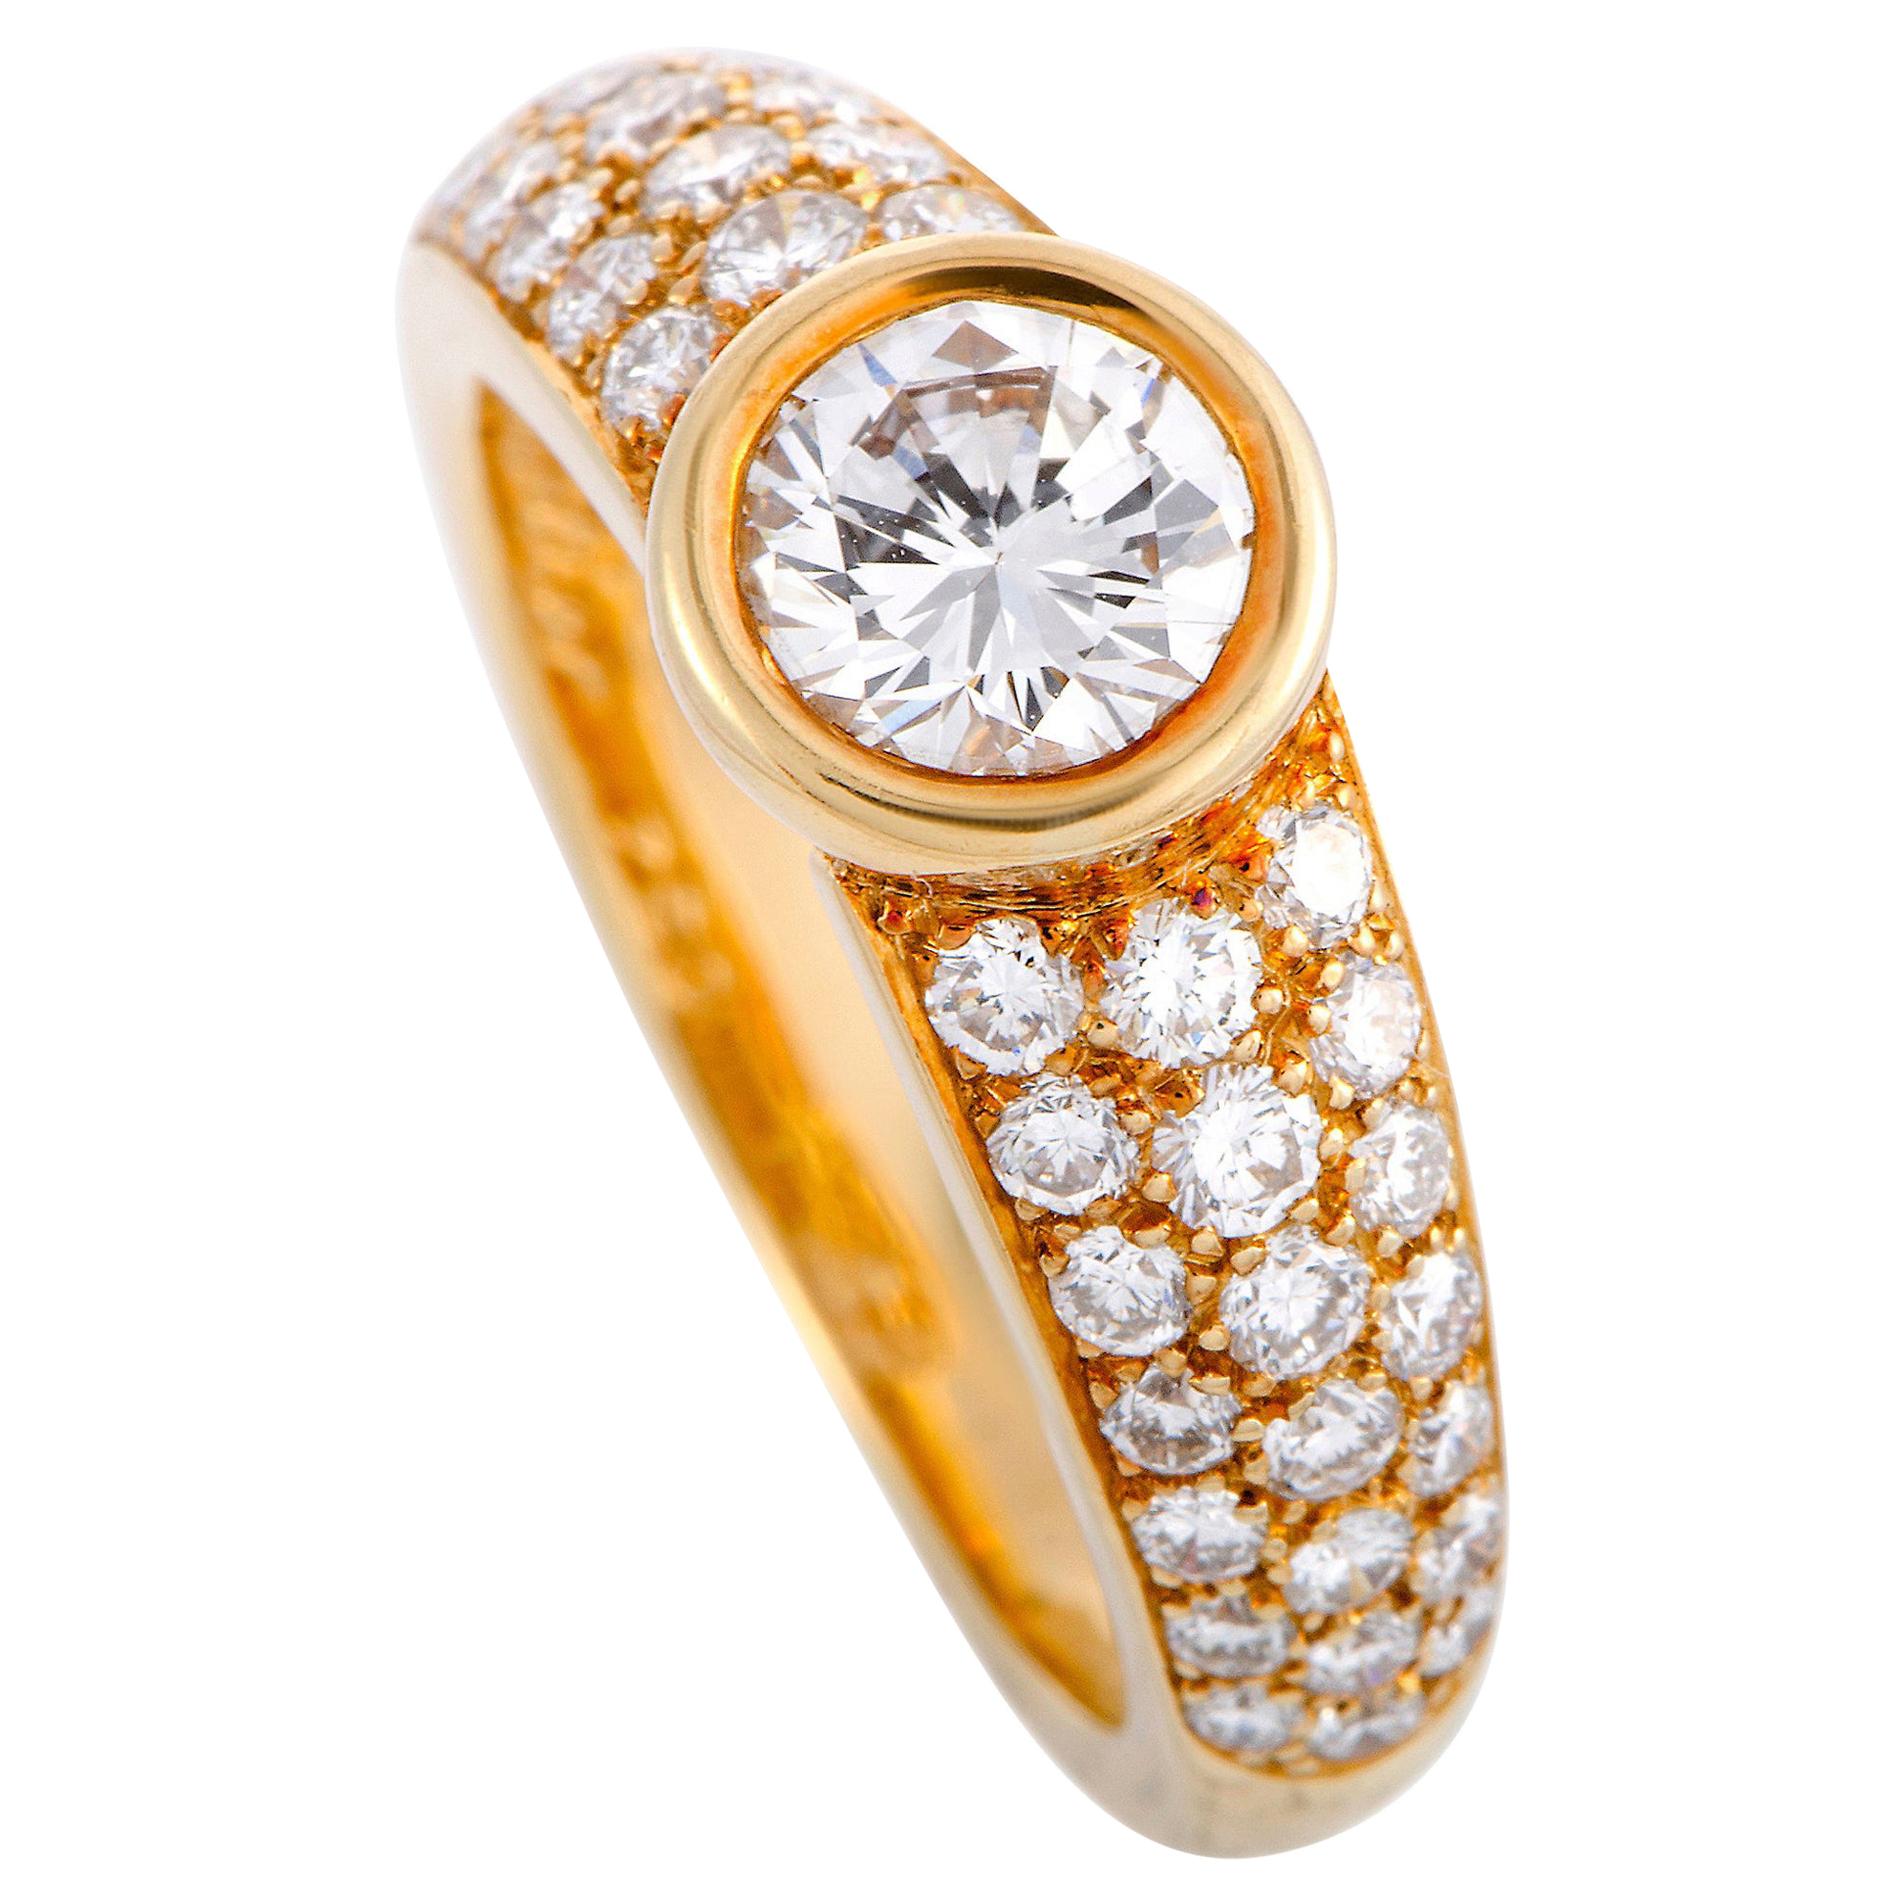 Cartier Diamond Pave Yellow Gold Engagement Ring